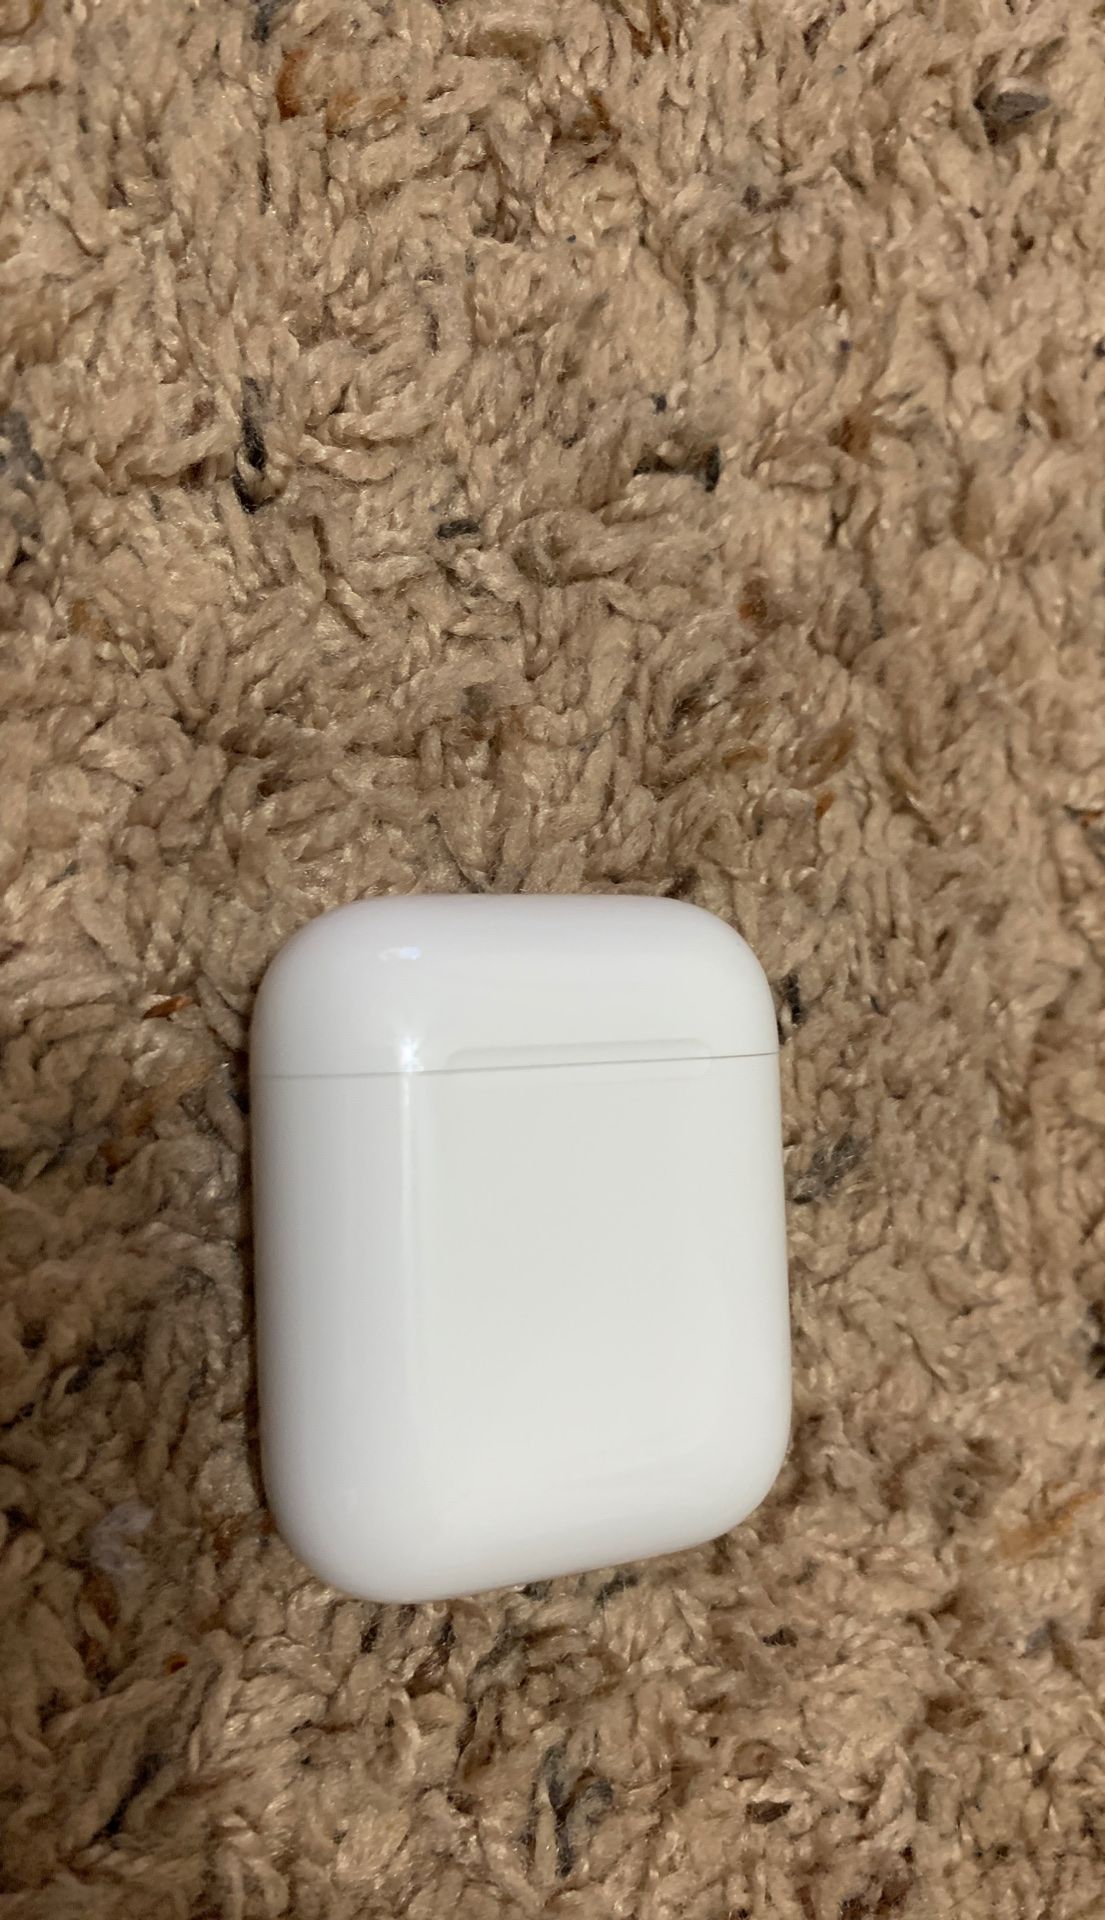 Apple Right AirPod with charger